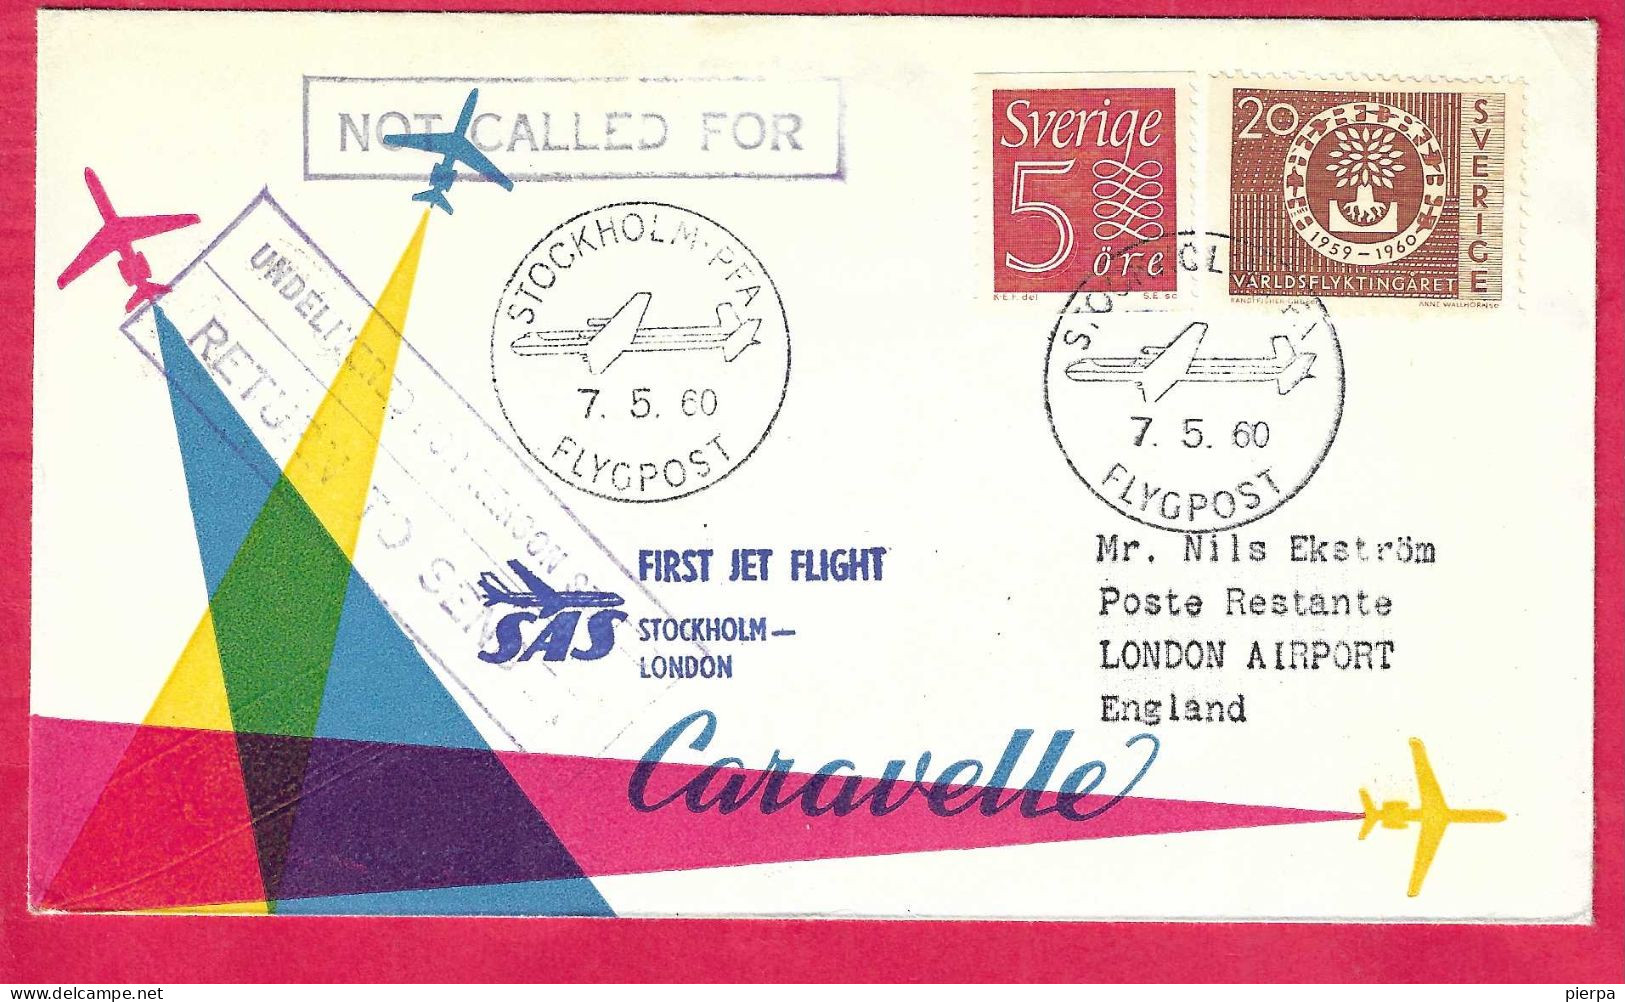 SVERIGE - FIRST CARAVELLE FLIGHT SAS  FROM STOCKHOLM TO LONDON *7.5.60* ON OFFICIAL COVER - Lettres & Documents